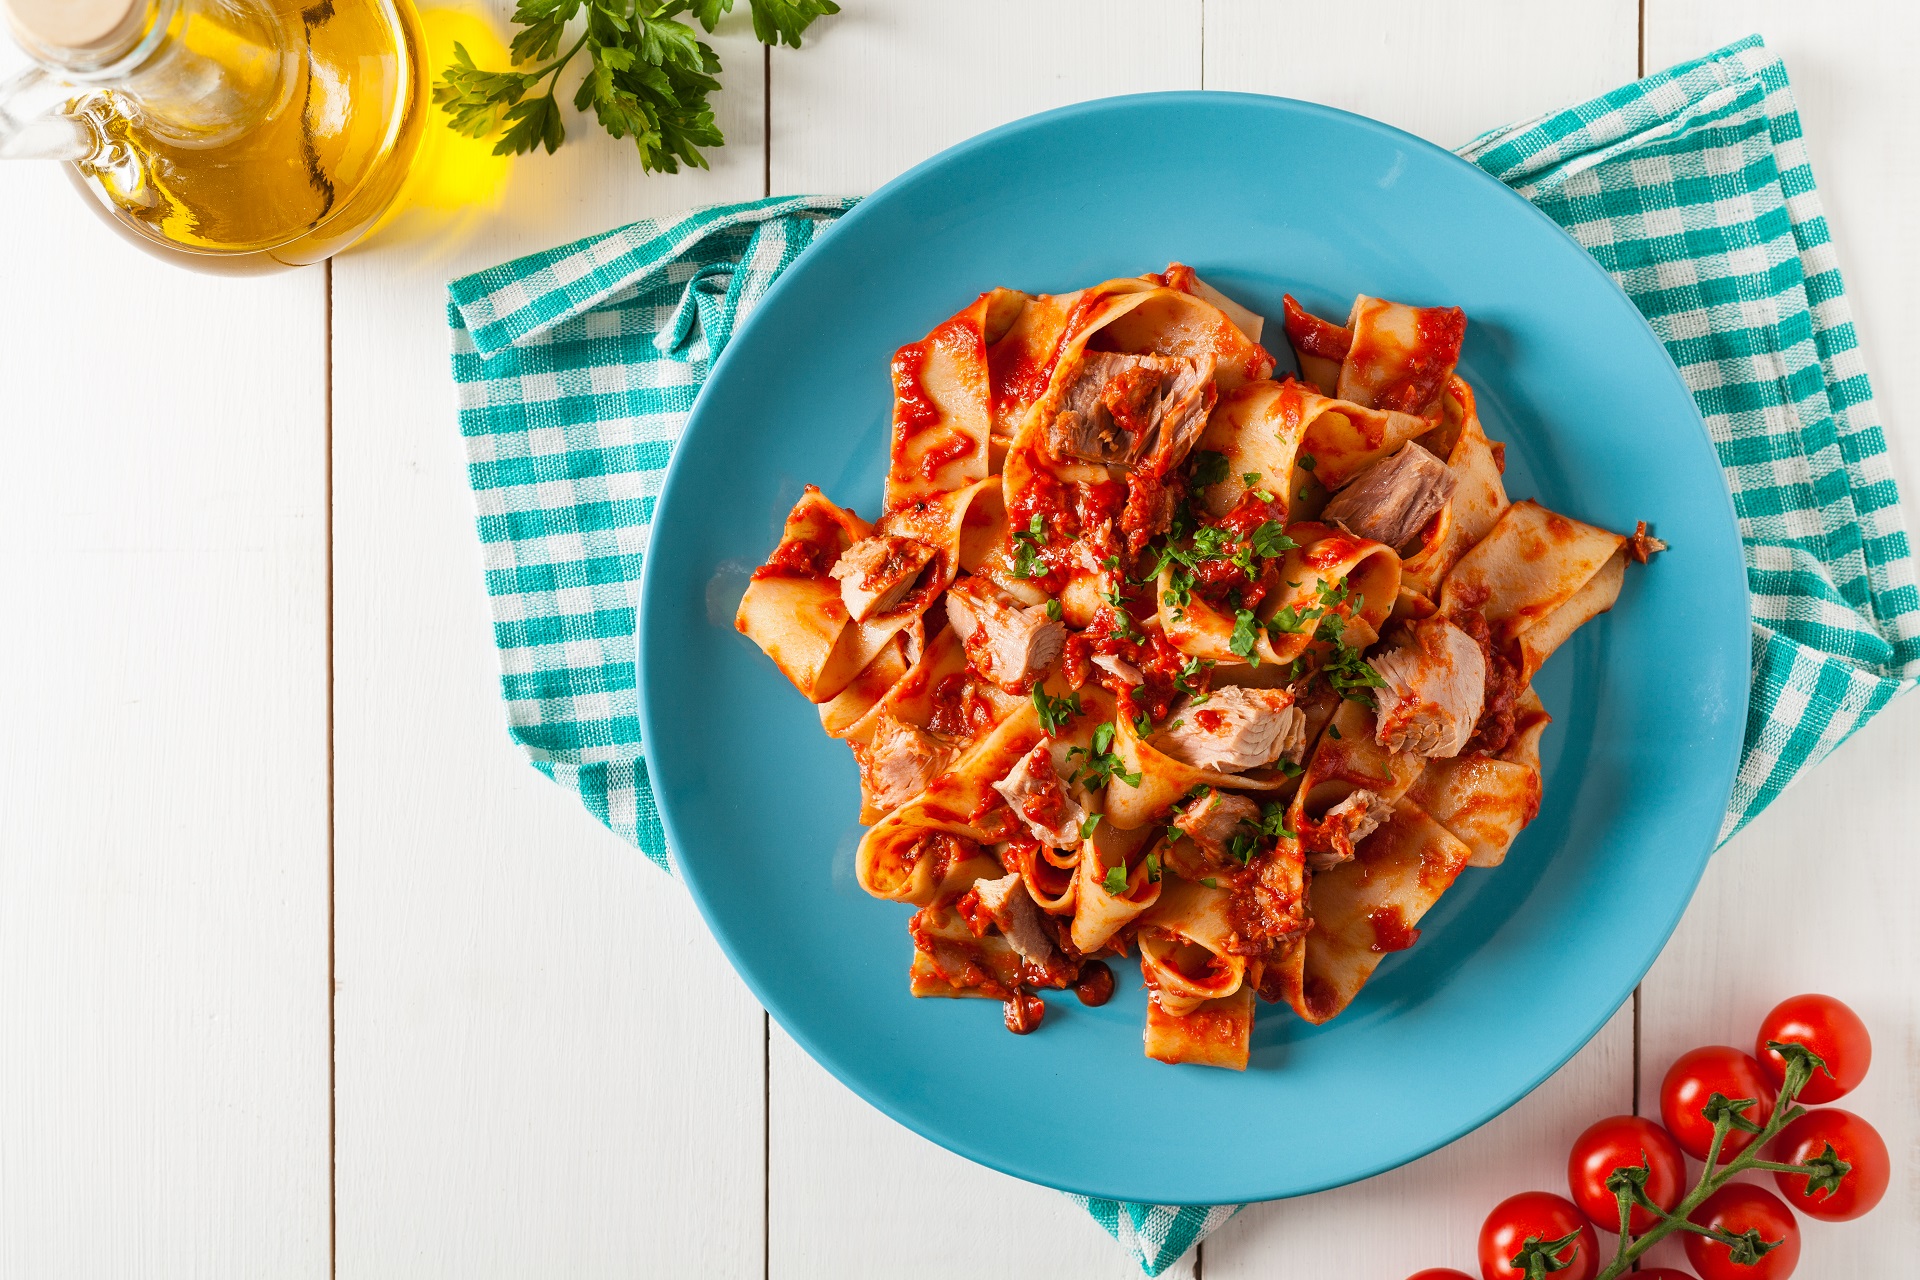 Pappardelle is a type of pasta. 